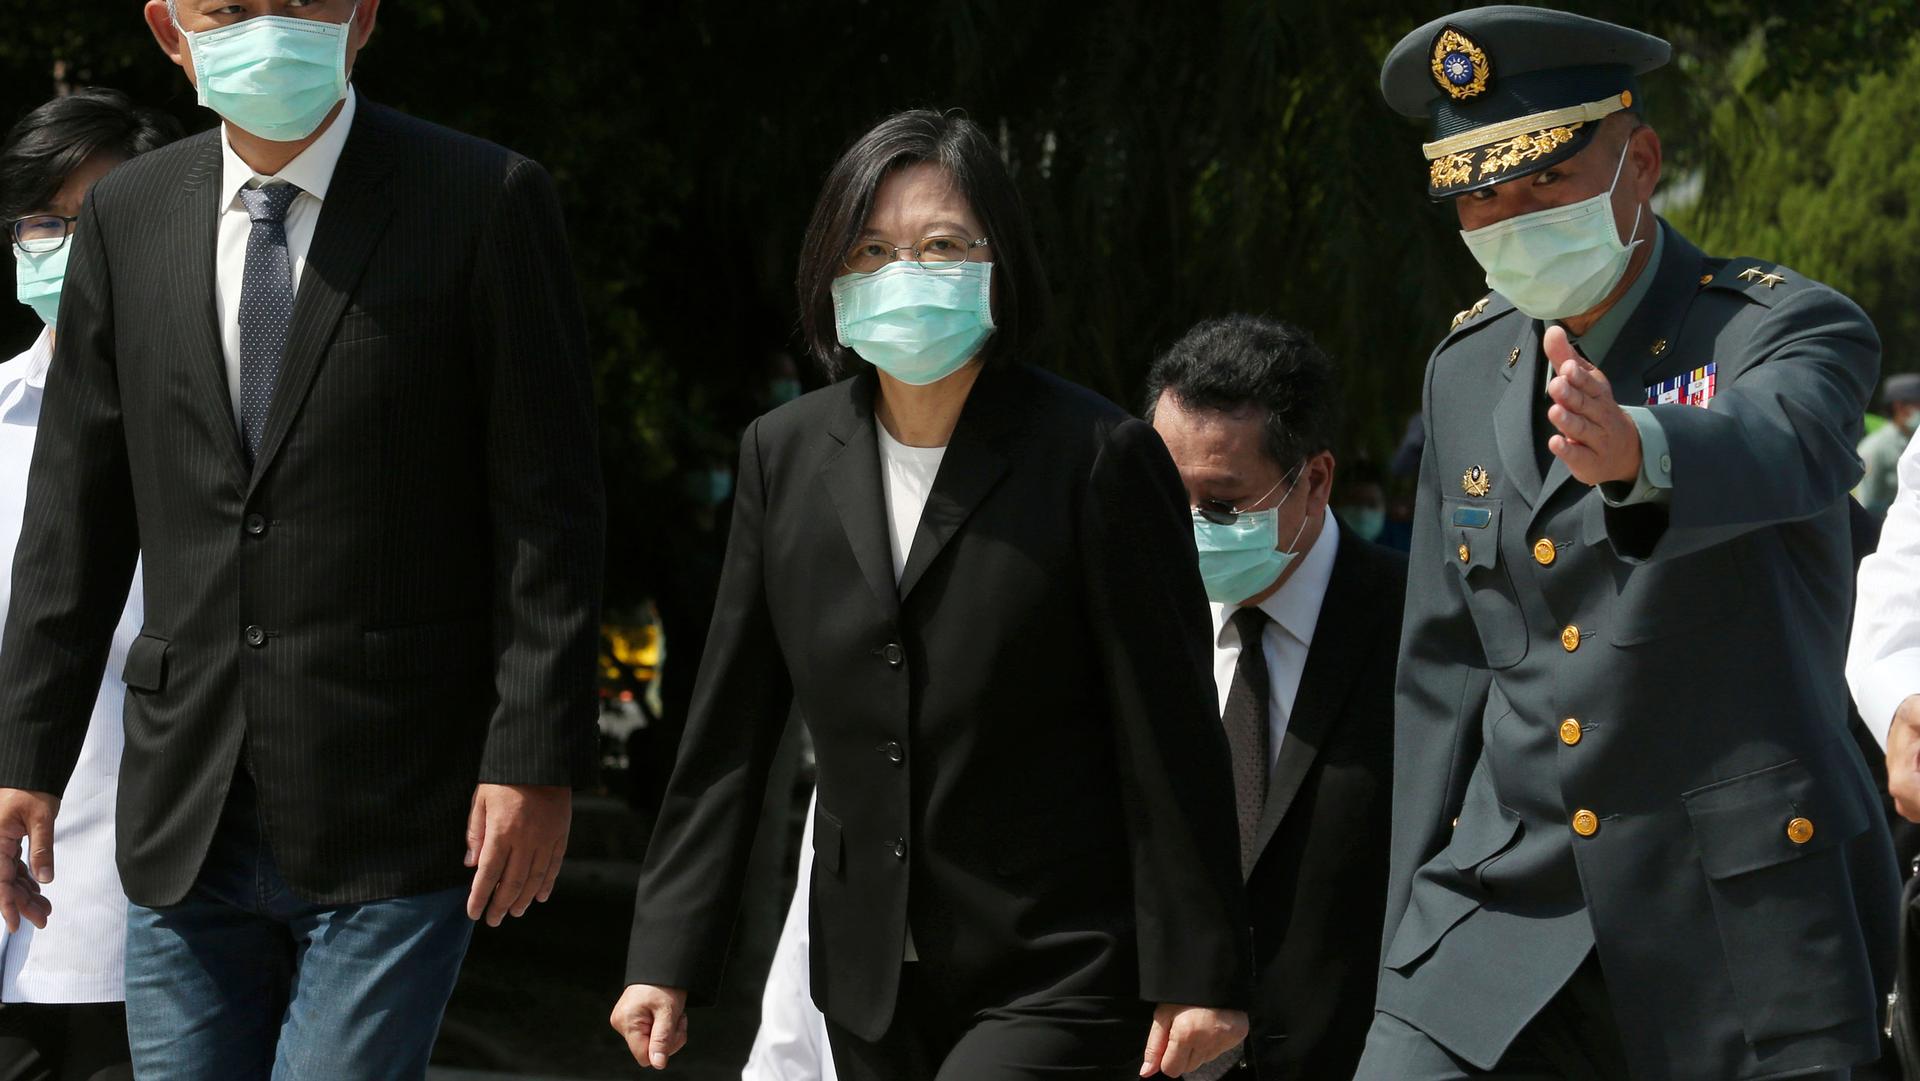 Taiwan's President Tsai Ing-wen is shown wearing a dark suit and walking while flanked by a military officials to her left.